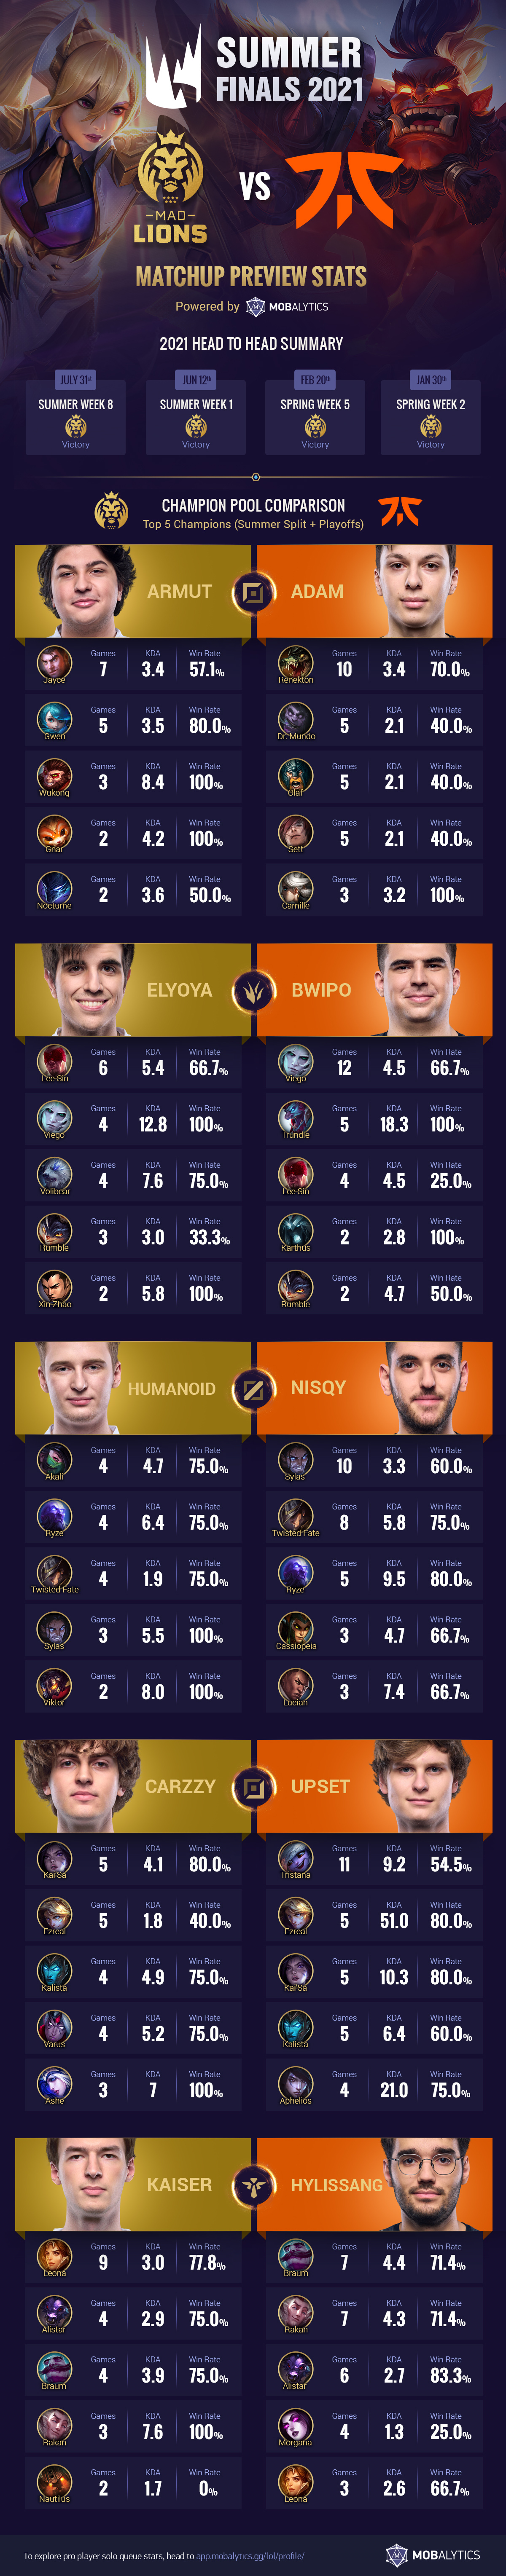 2021 LEC Summer Finals: MAD vs FNC - Matchup Preview Stats (Infographic)